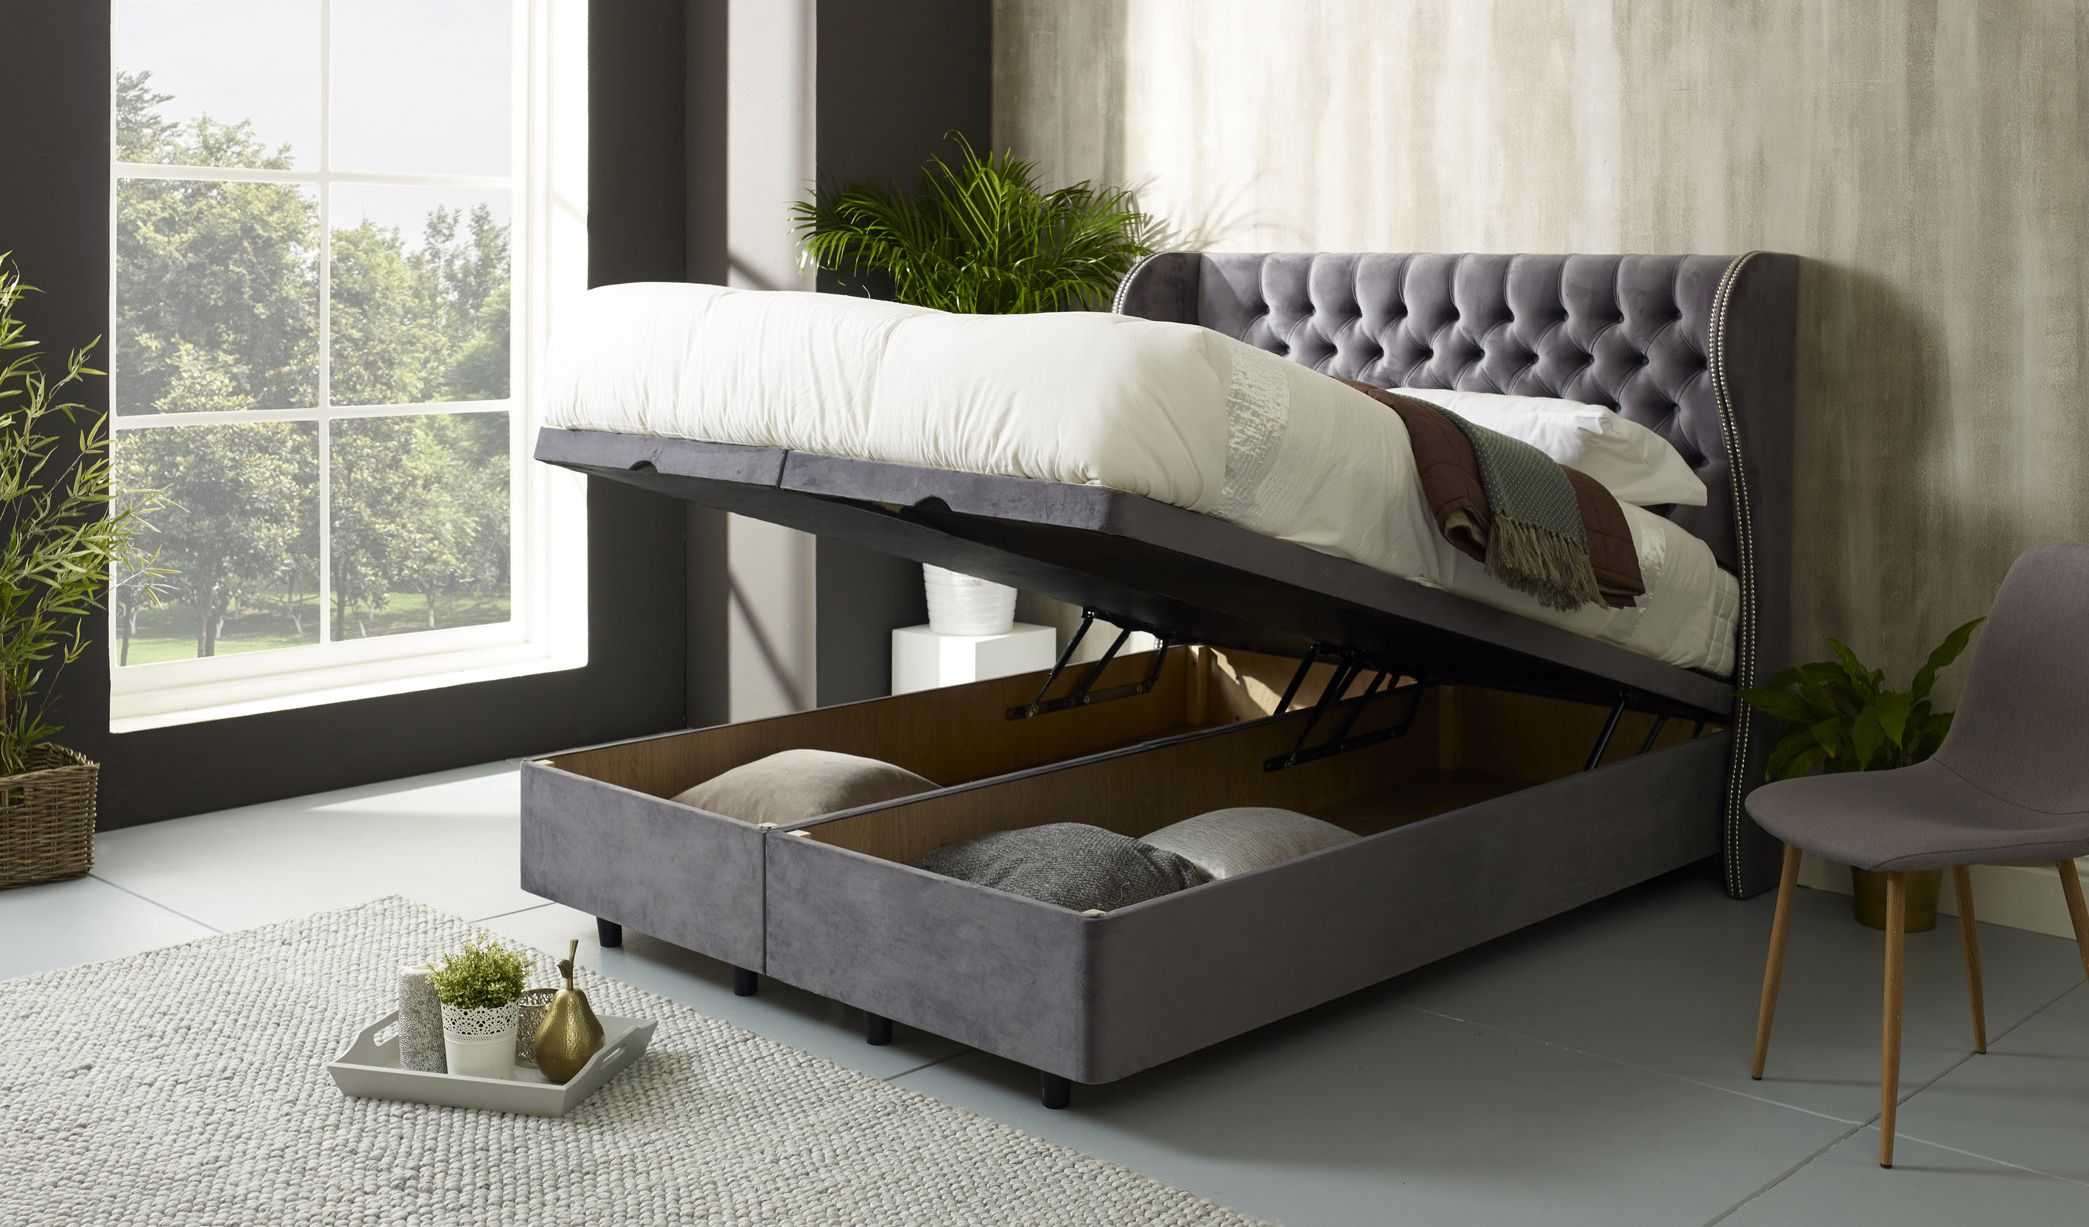 Giovana Wing Floating Ottoman Bed Frame With Studs – Bedworld Within Floating Ottomans (Gallery 16 of 20)